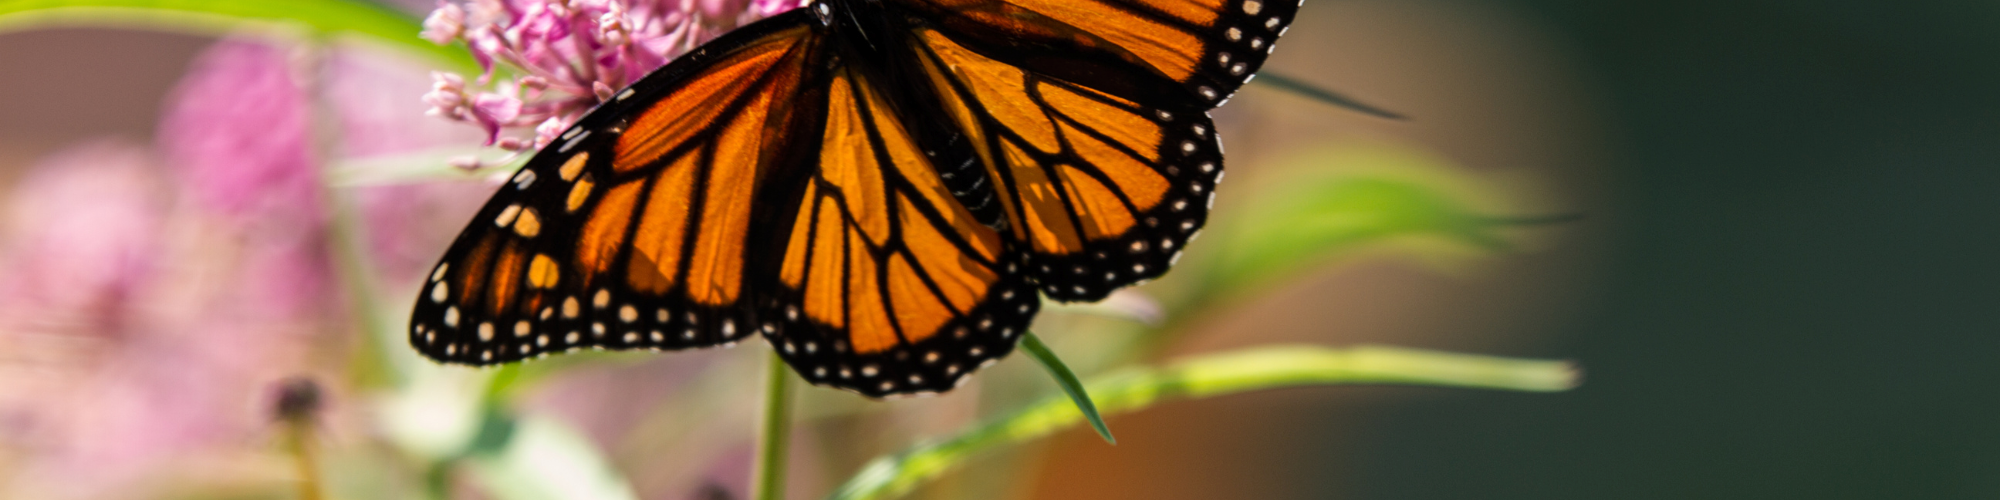 A vibrant orange and black butterfly is perched on a pink flower within lush green foliage, both in crisp focus against a blurred background.